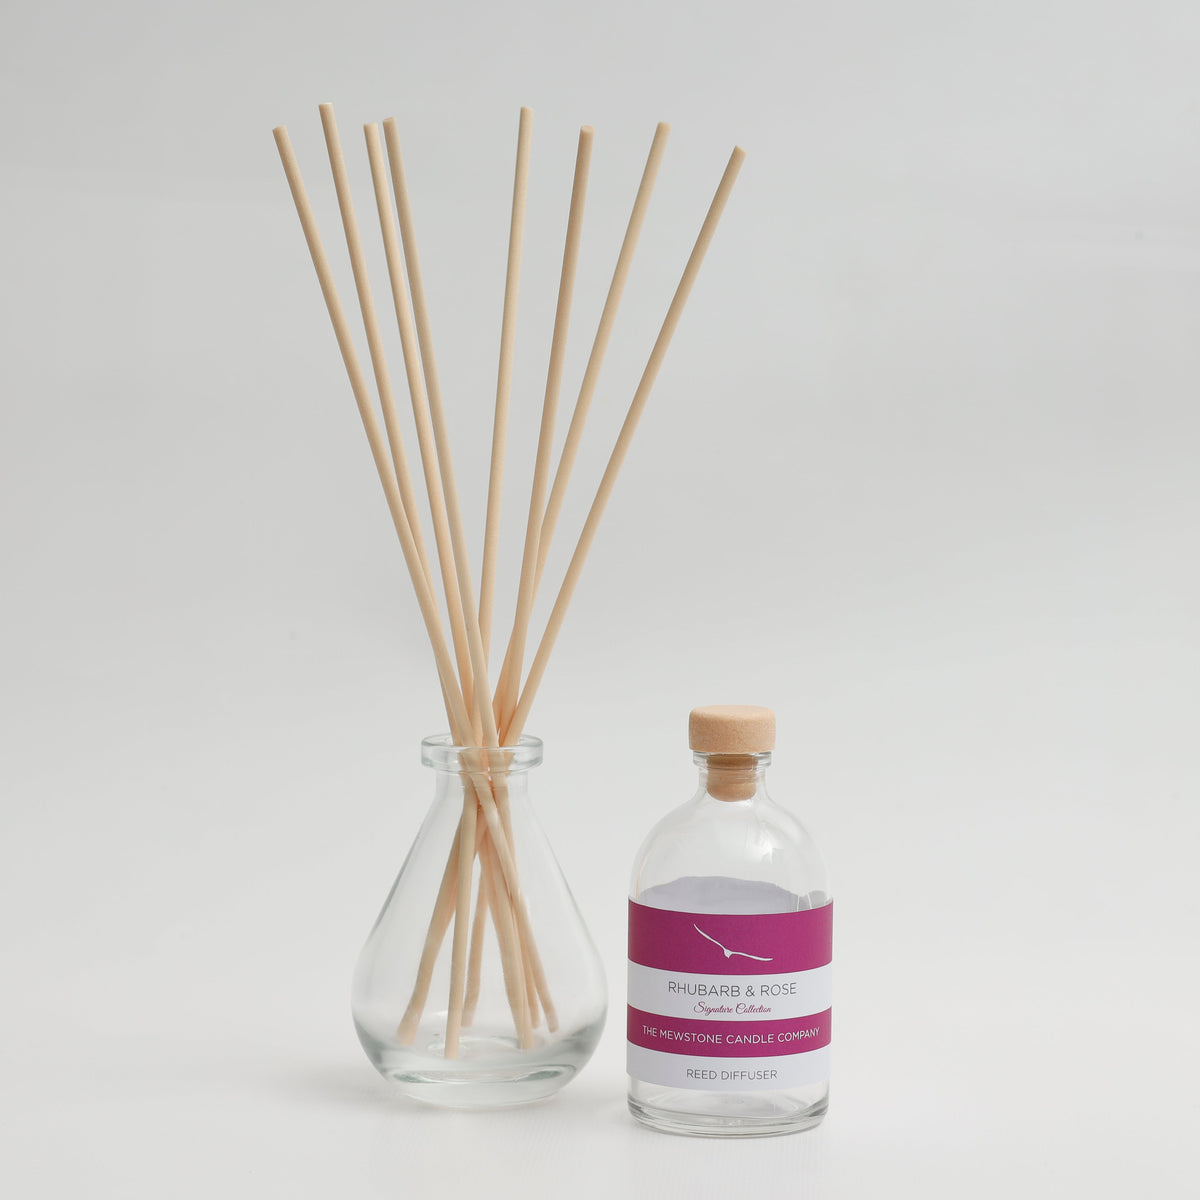 Rhubarb & Rose Reed Diffuser - The Mewstone Candle Co